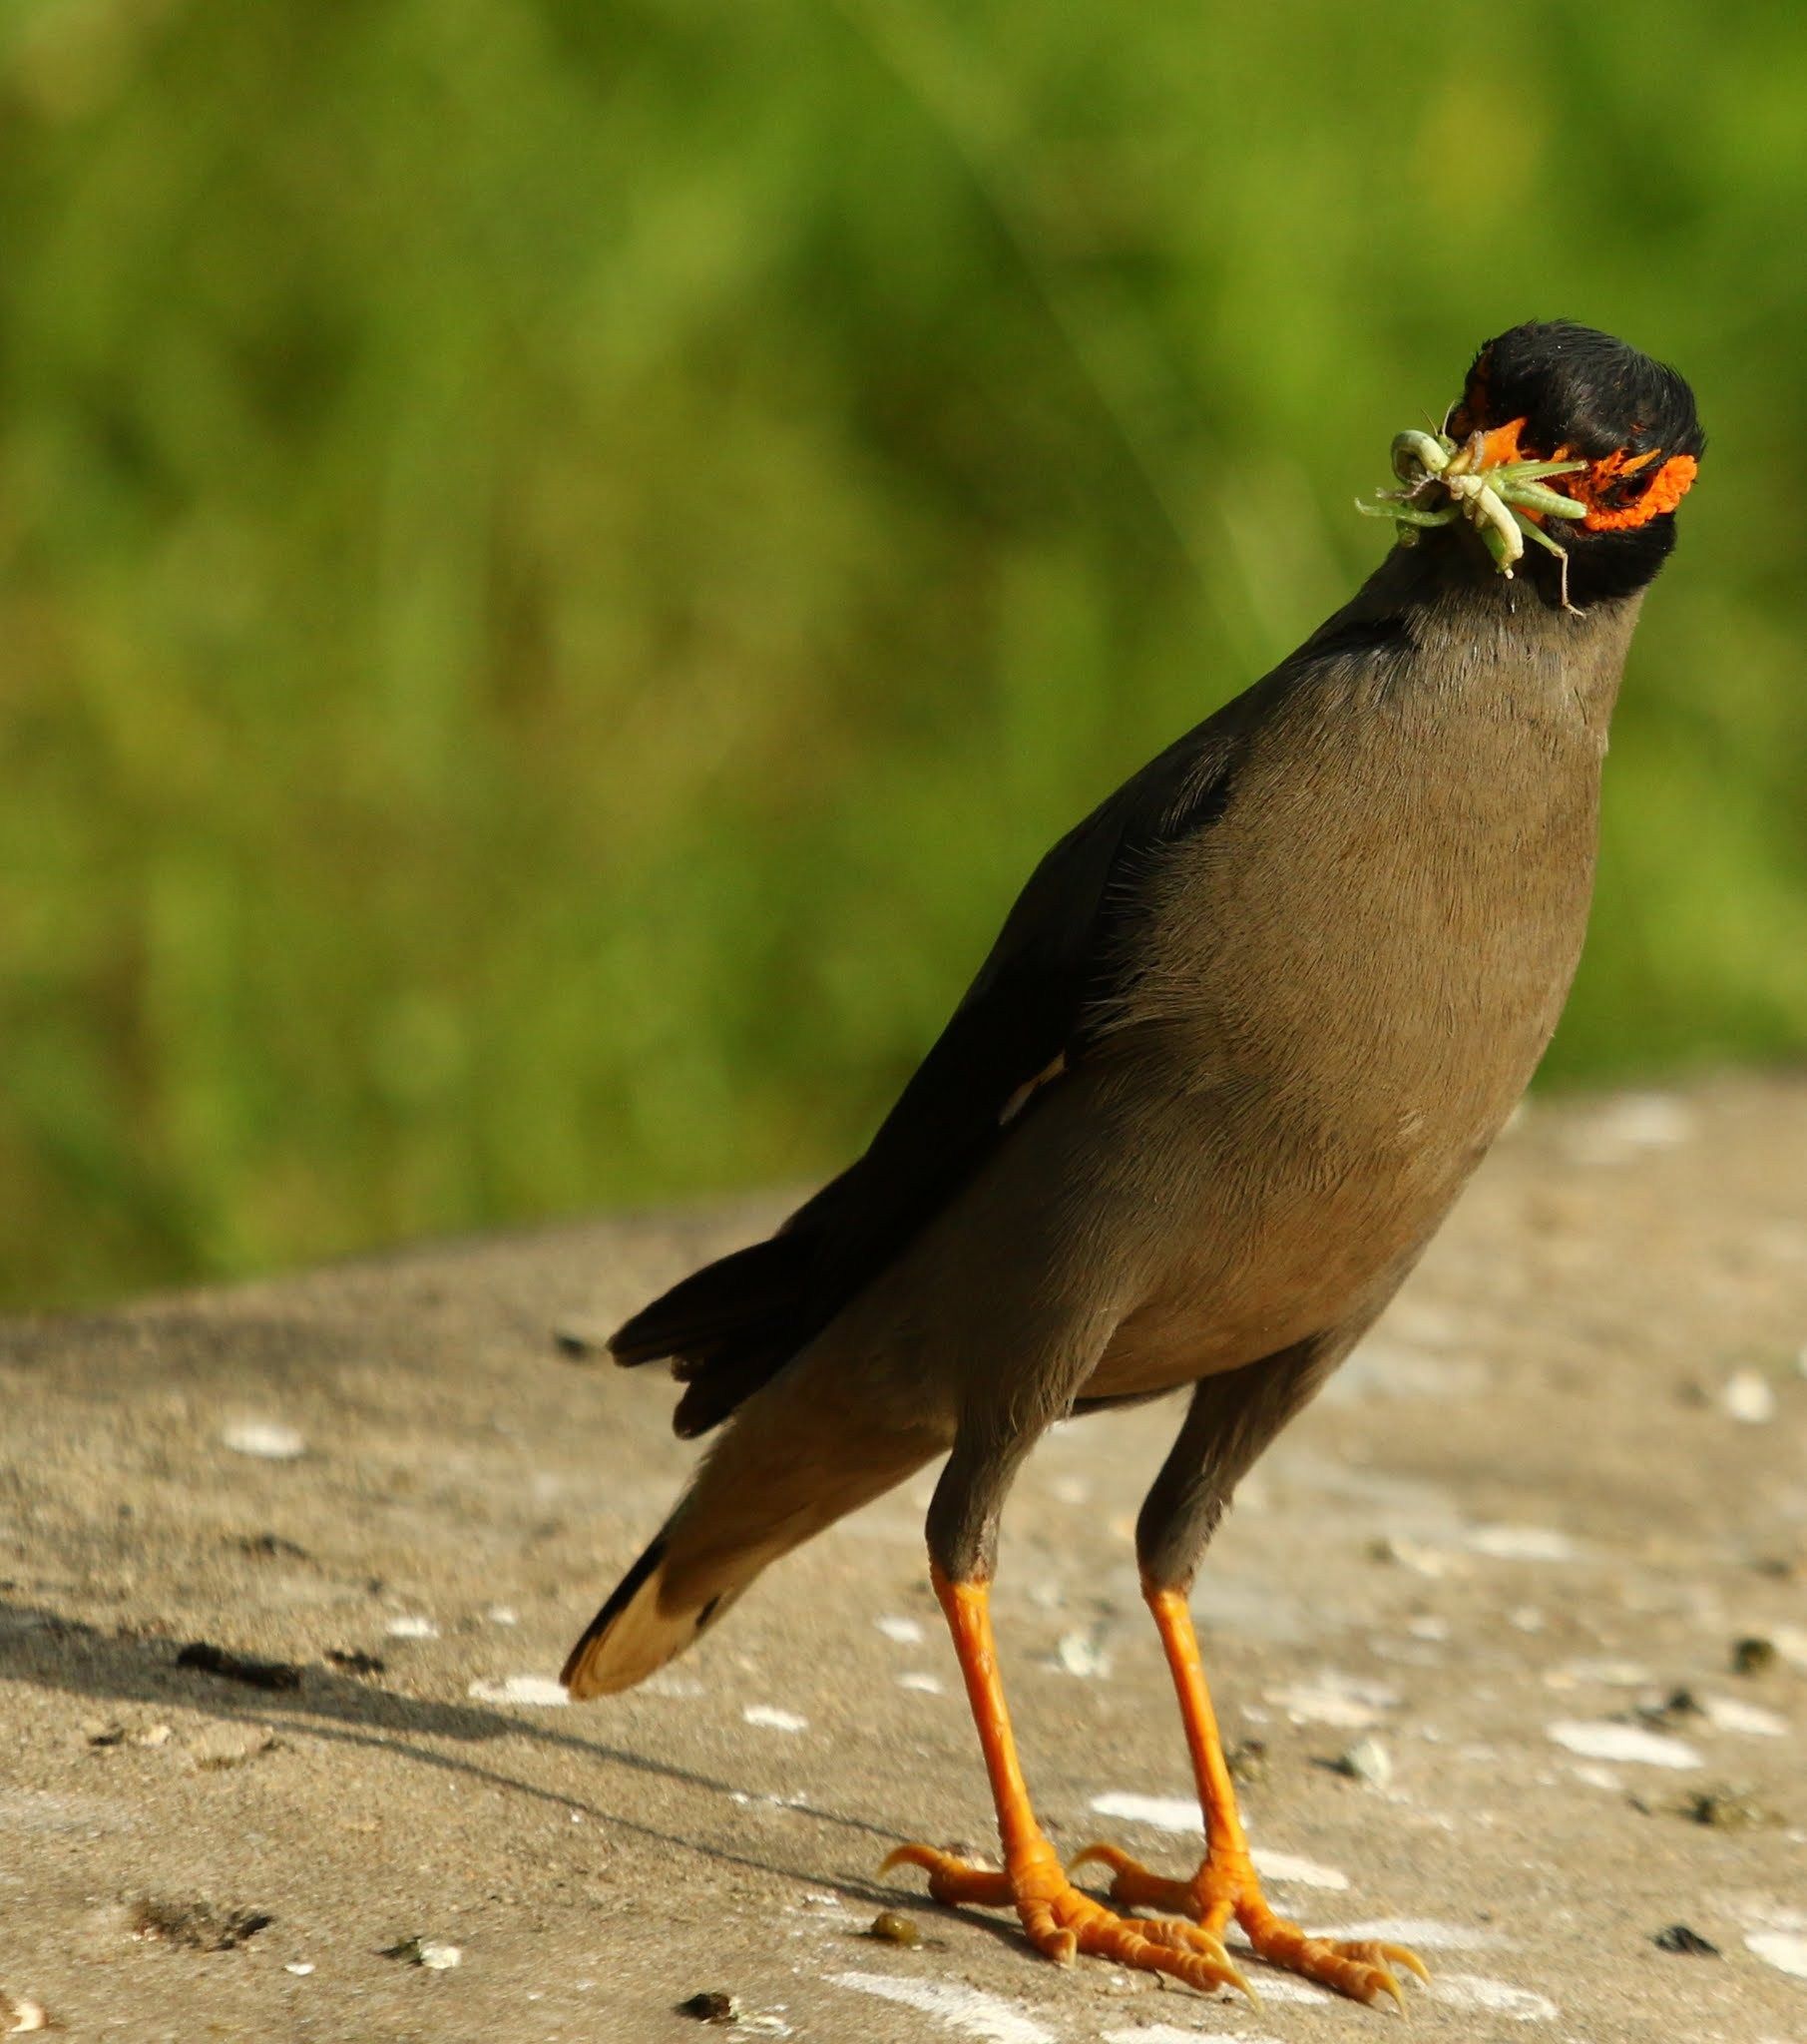 Myna with Prey Food. Digital art photography, Wallpaper background, Painting illustration